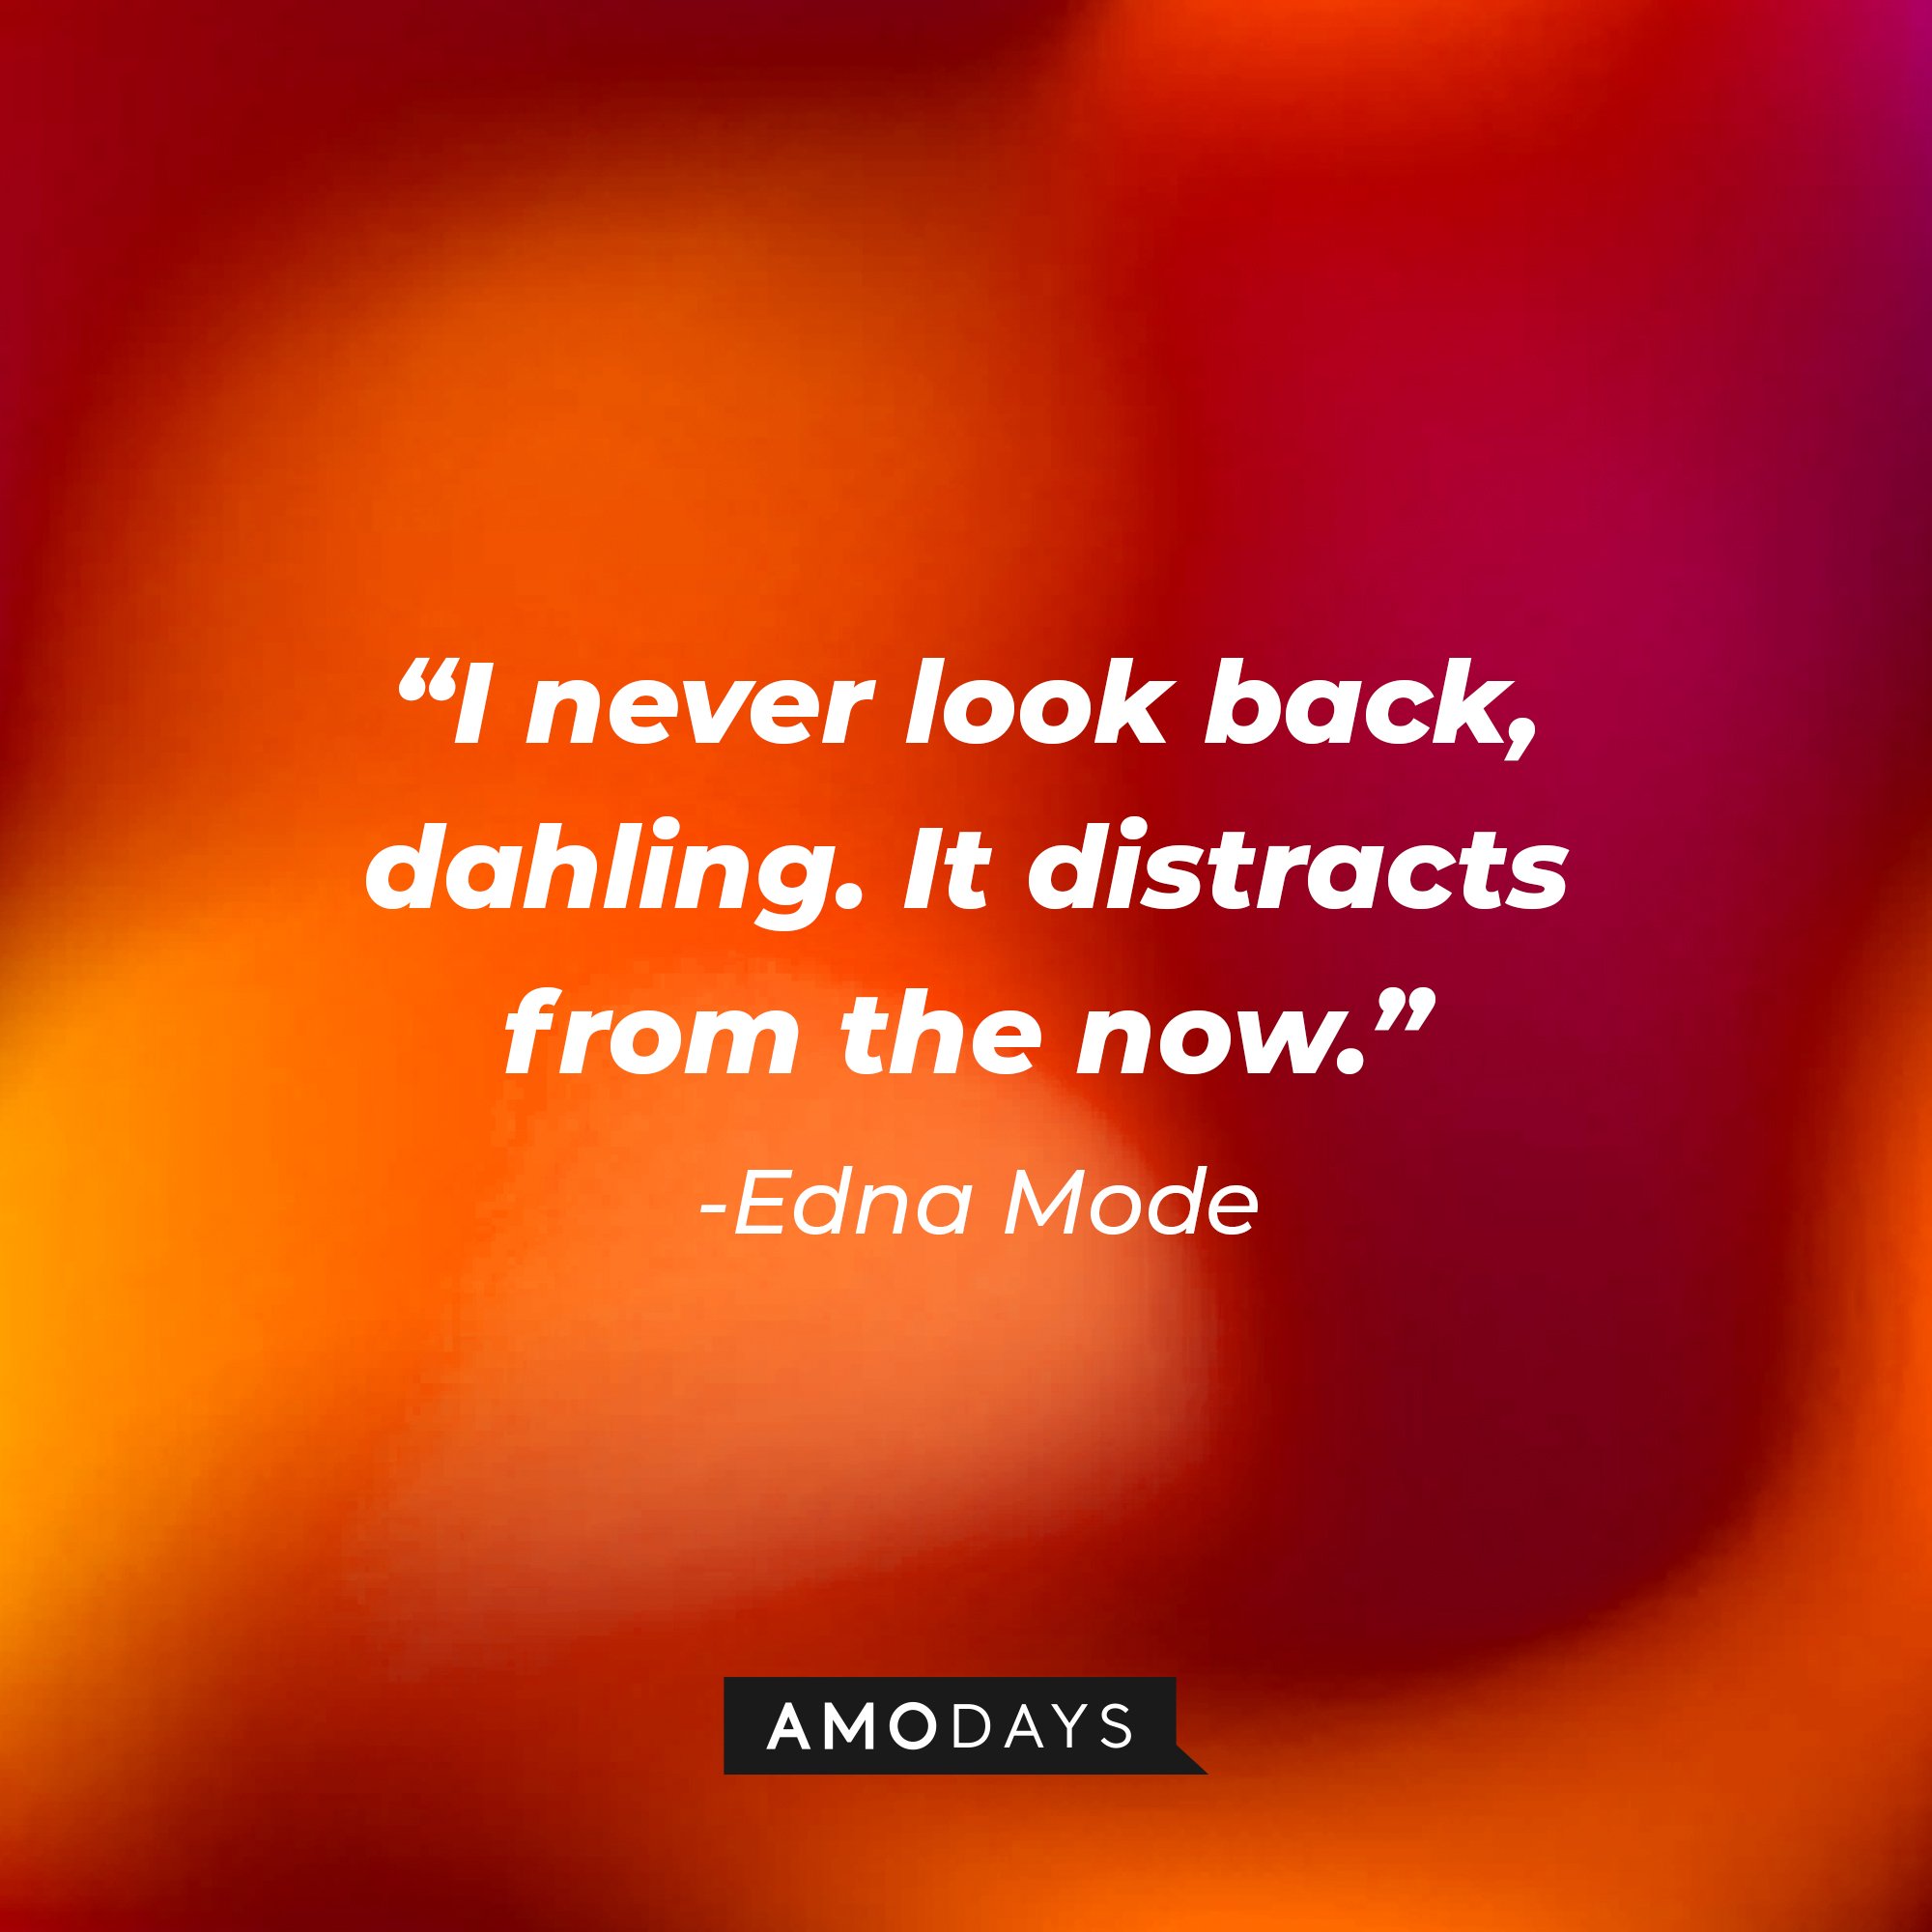  Edna Mode’s quote: "I never look back, dahling. It distracts from the now." |  Image: AmoDays